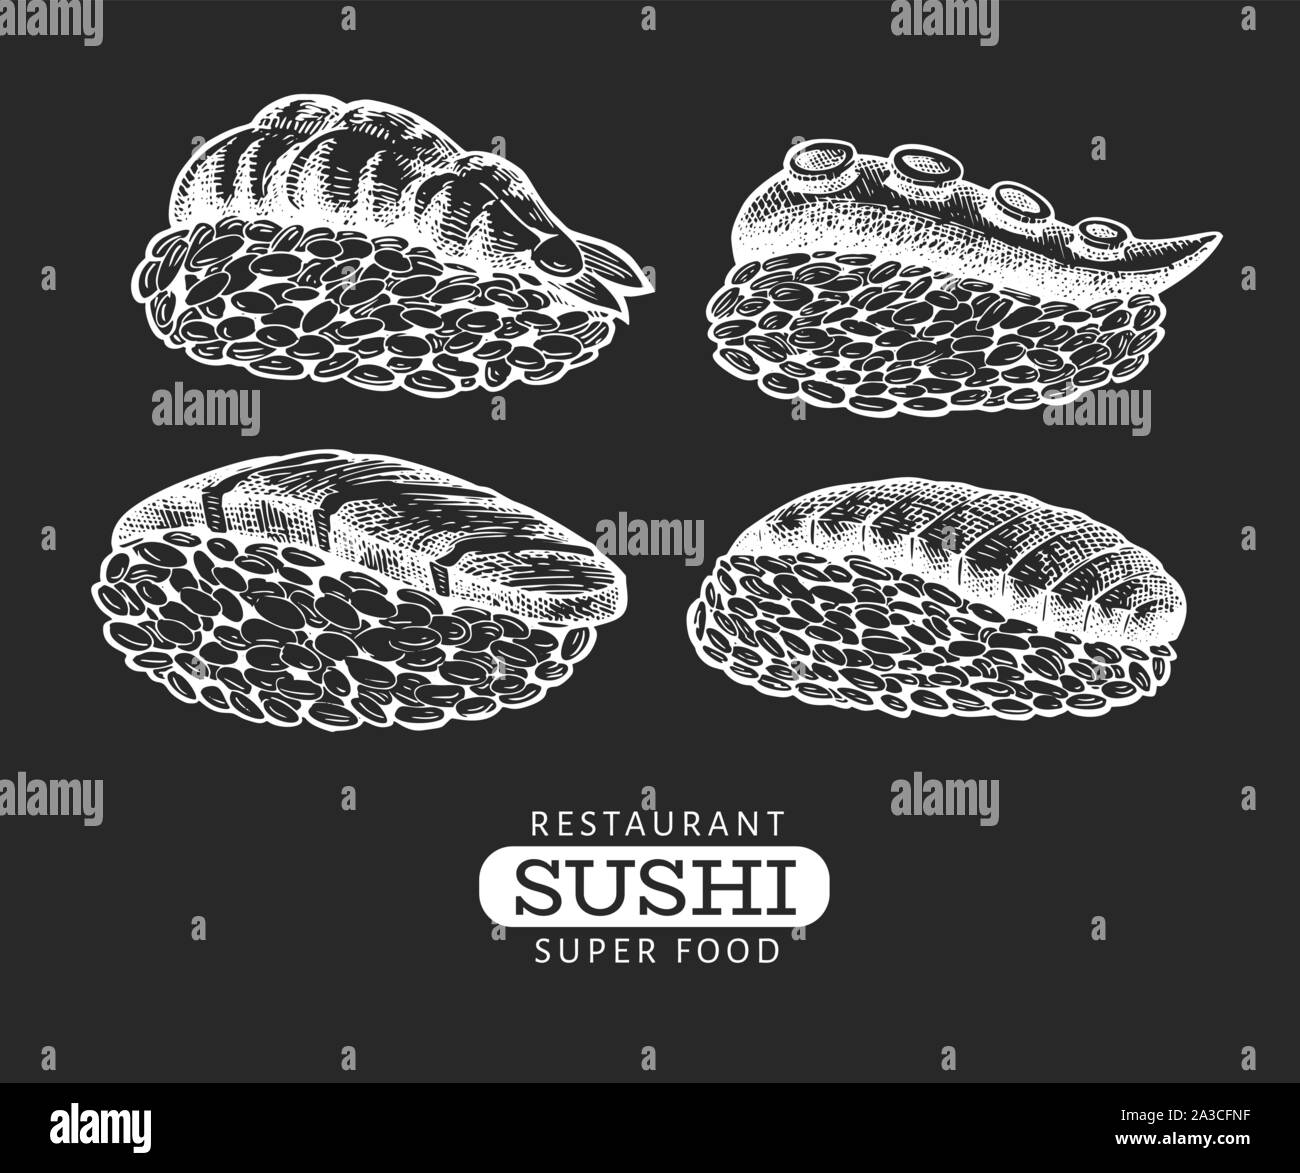 Sushi nigiri hand drawn vector illustrations on chalk board. Japanese cuisine elements vintage style. Asian food background. Stock Vector